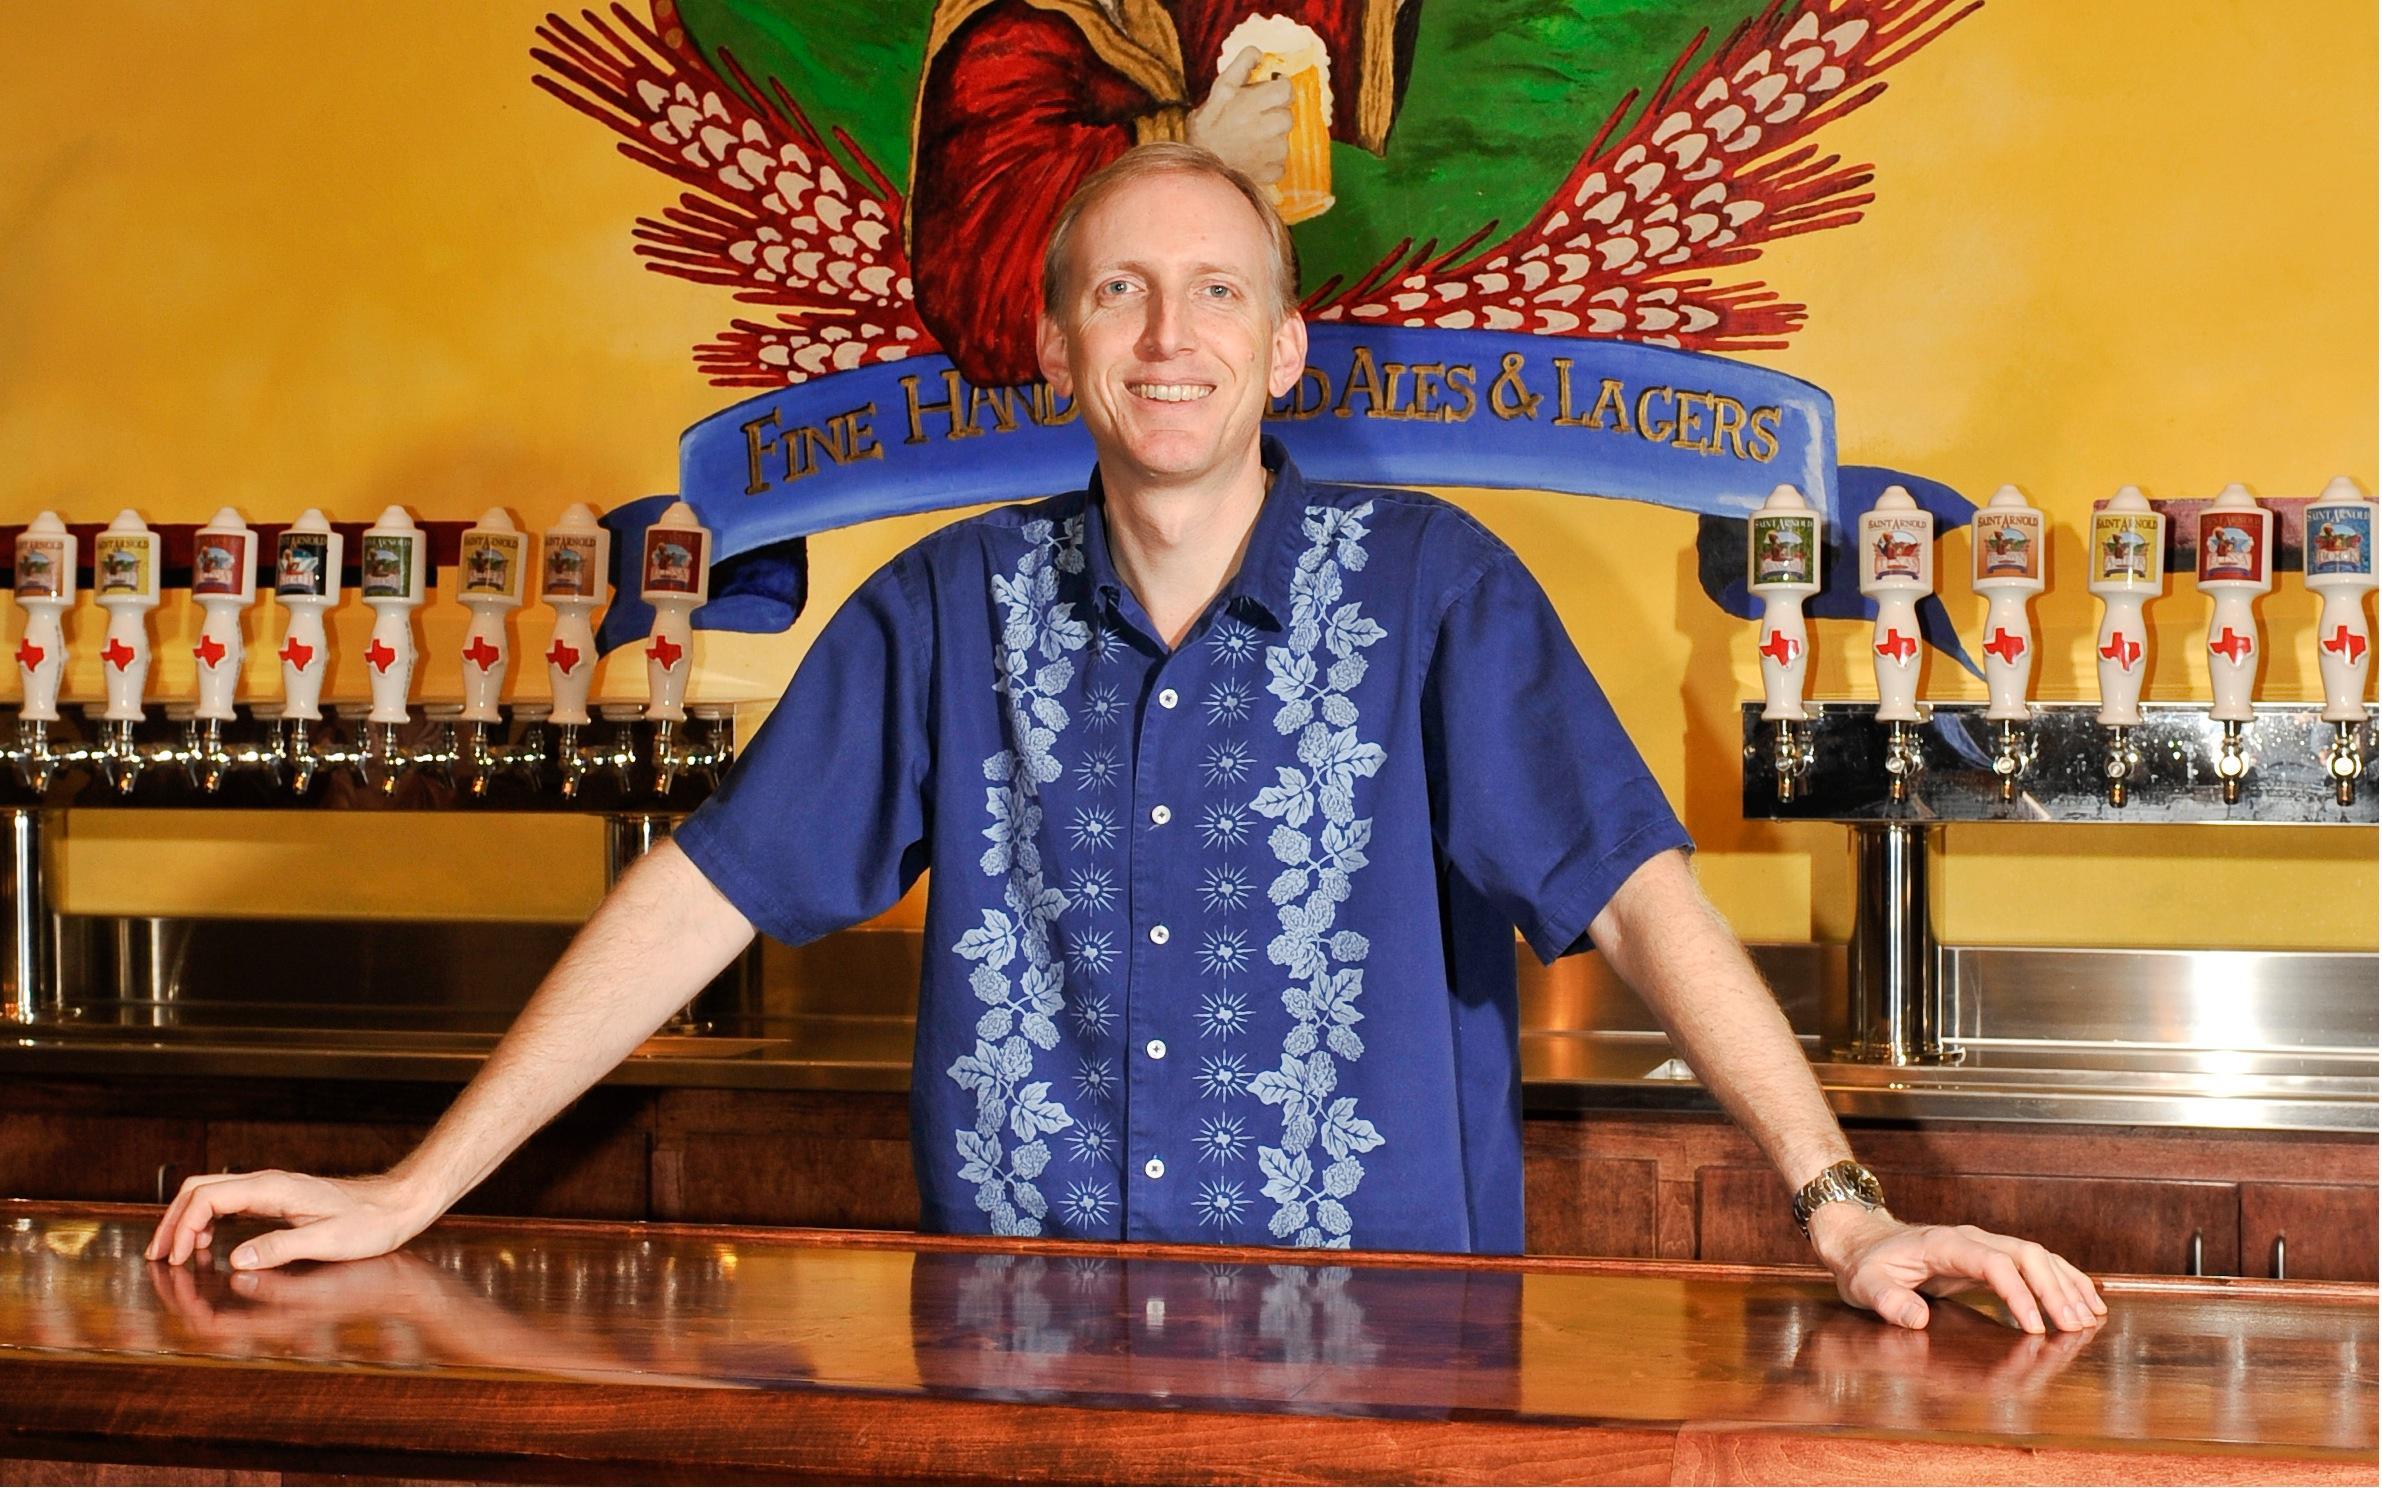 Saint Arnold Brewing Company Founder/Brewer Brock Wagner